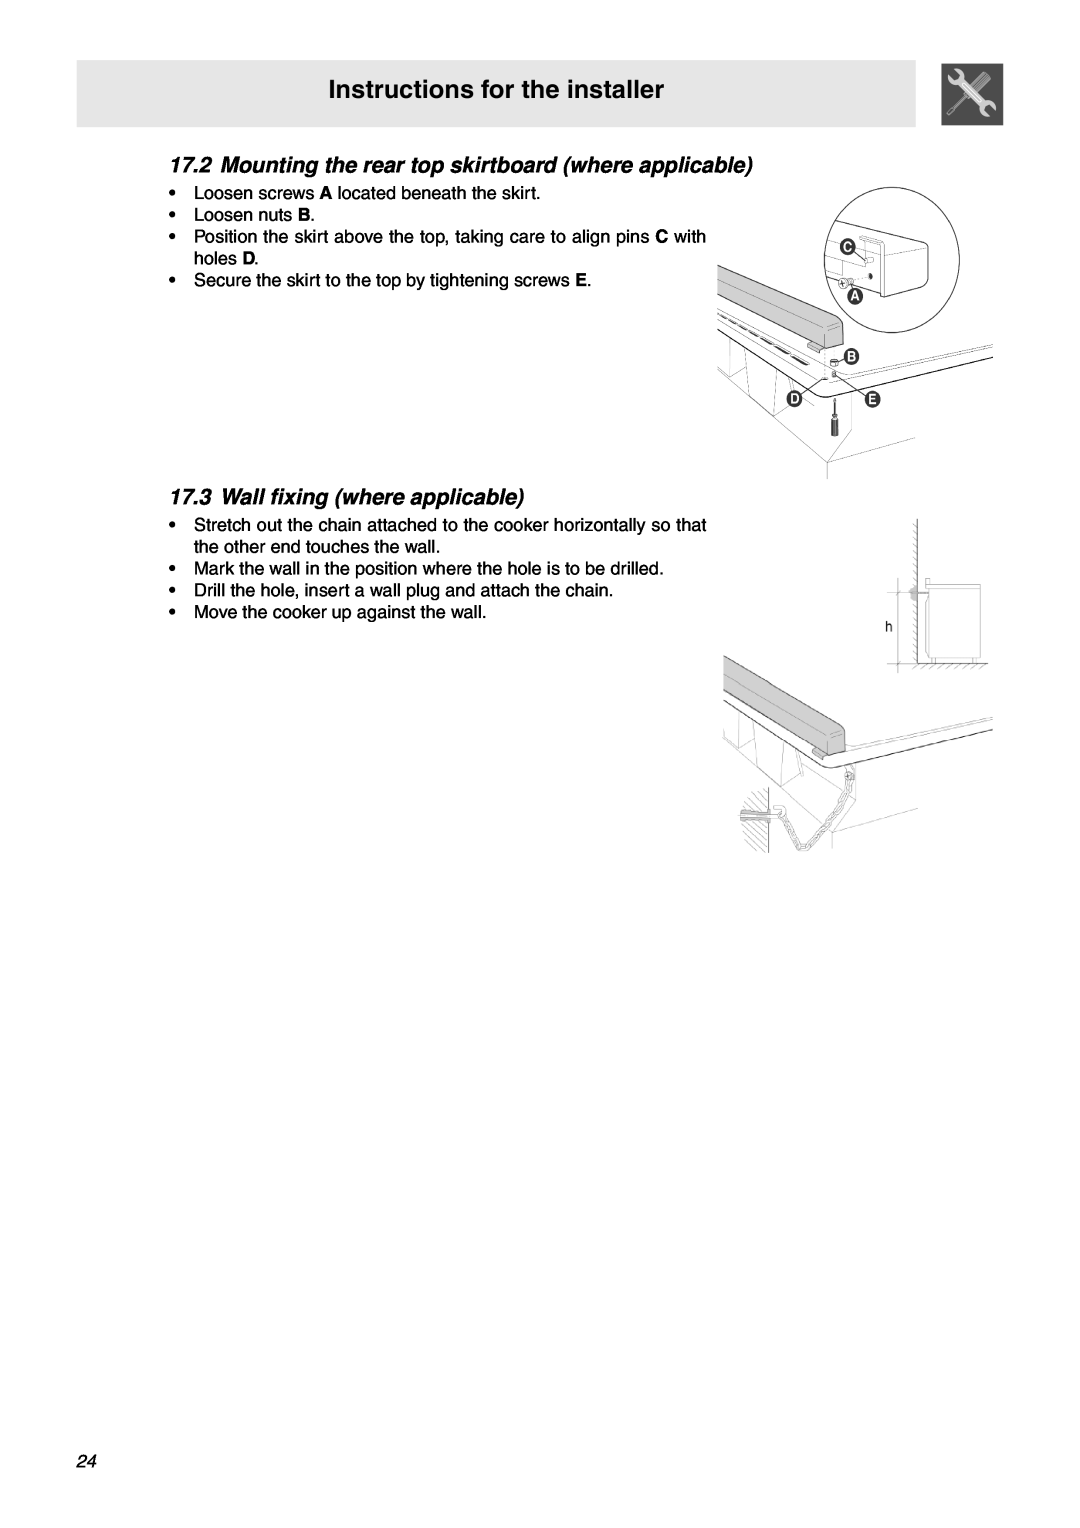 Smeg SNZ61MFX1, SNZ61MFA1 manual Mounting the rear top skirtboard where applicable, Wall fixing where applicable 